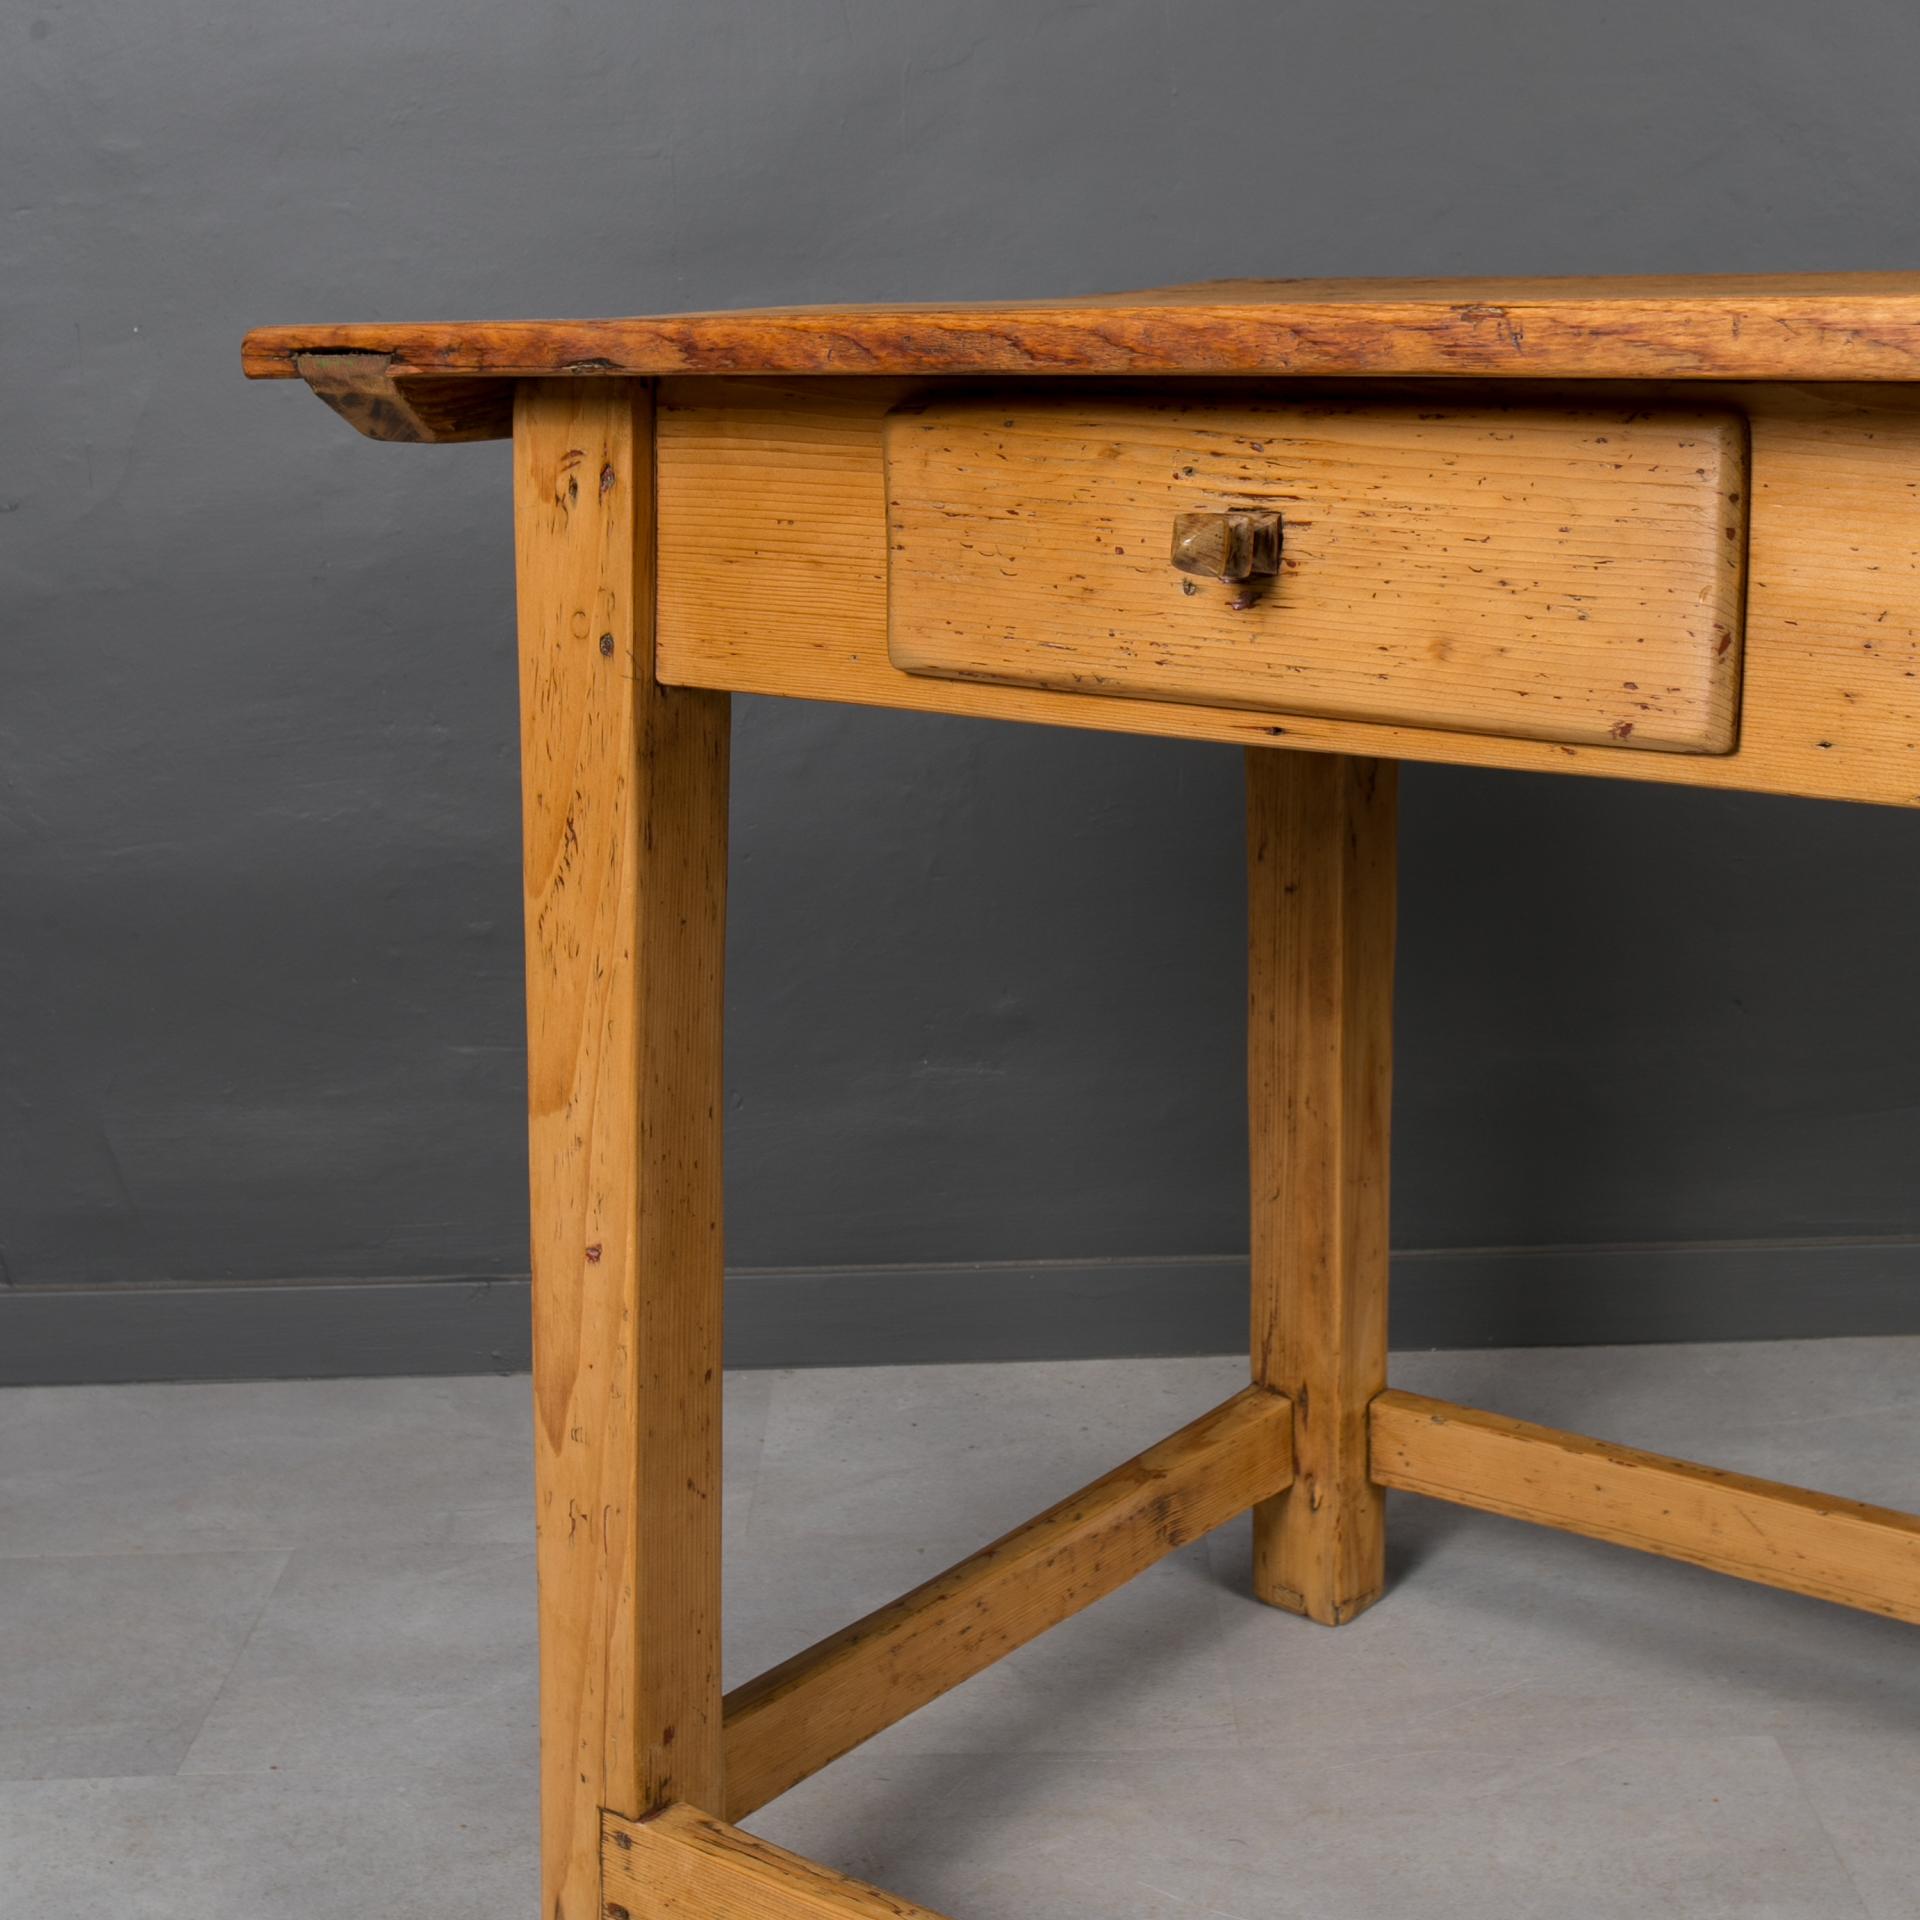 Vintage Pine Wood Table, Rustic Style, Prep or Dining Table, Kitchen Island For Sale 2